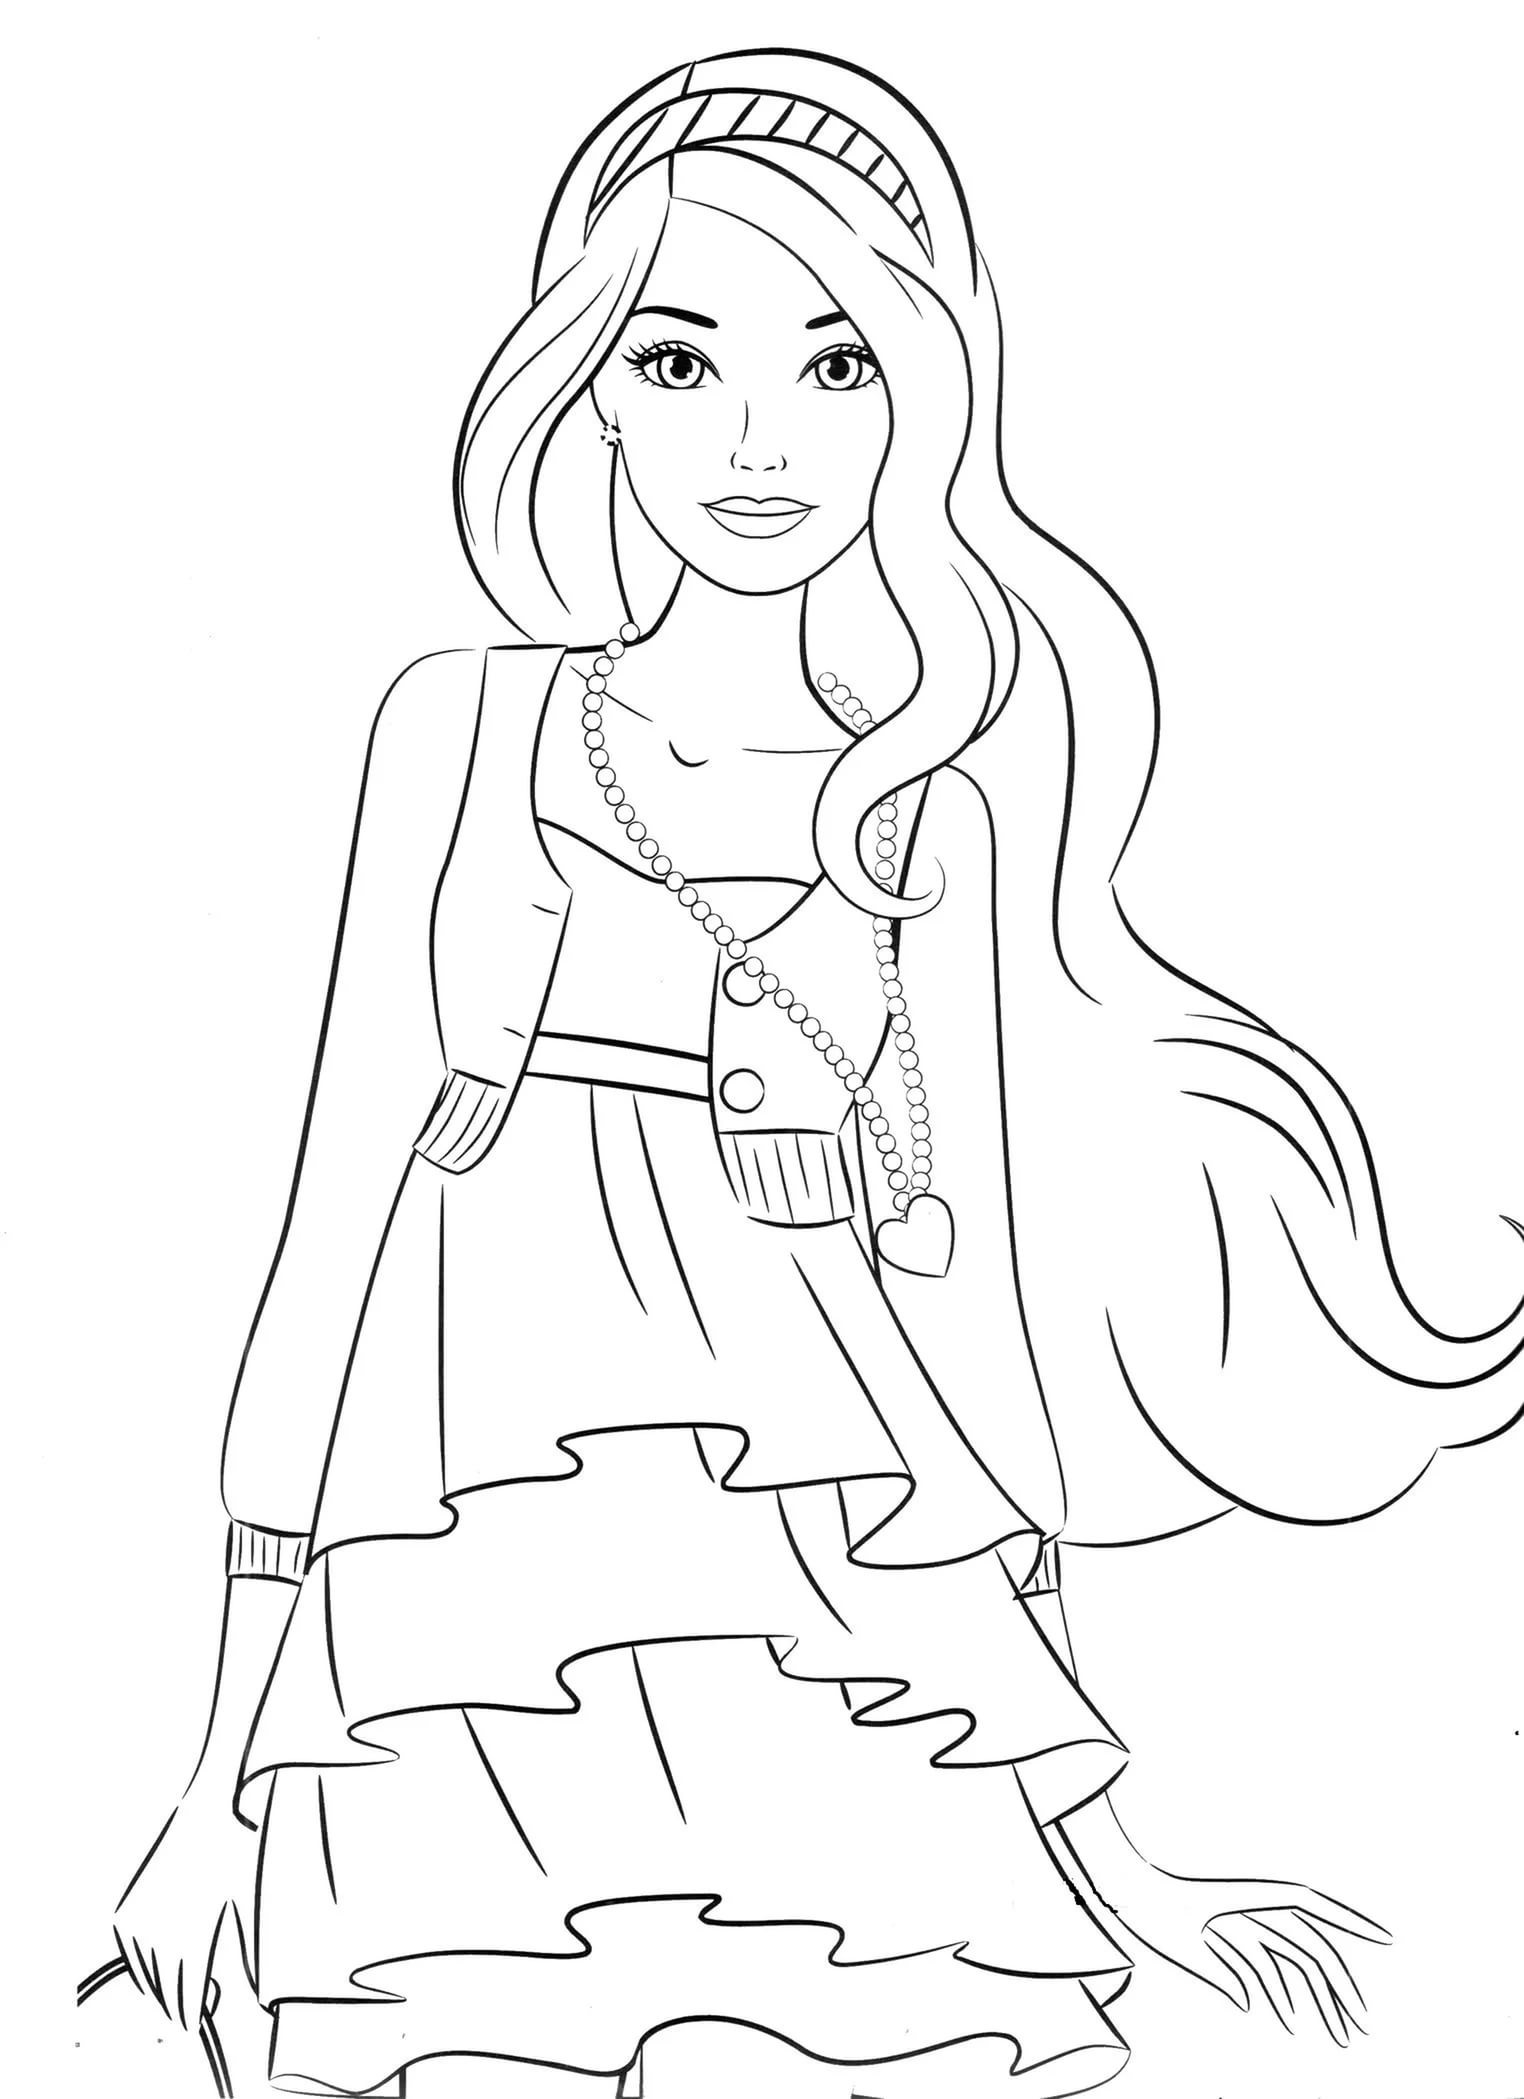 Coloring Pages To Print For Girls
 Coloring pages for 8 9 10 year old girls to and